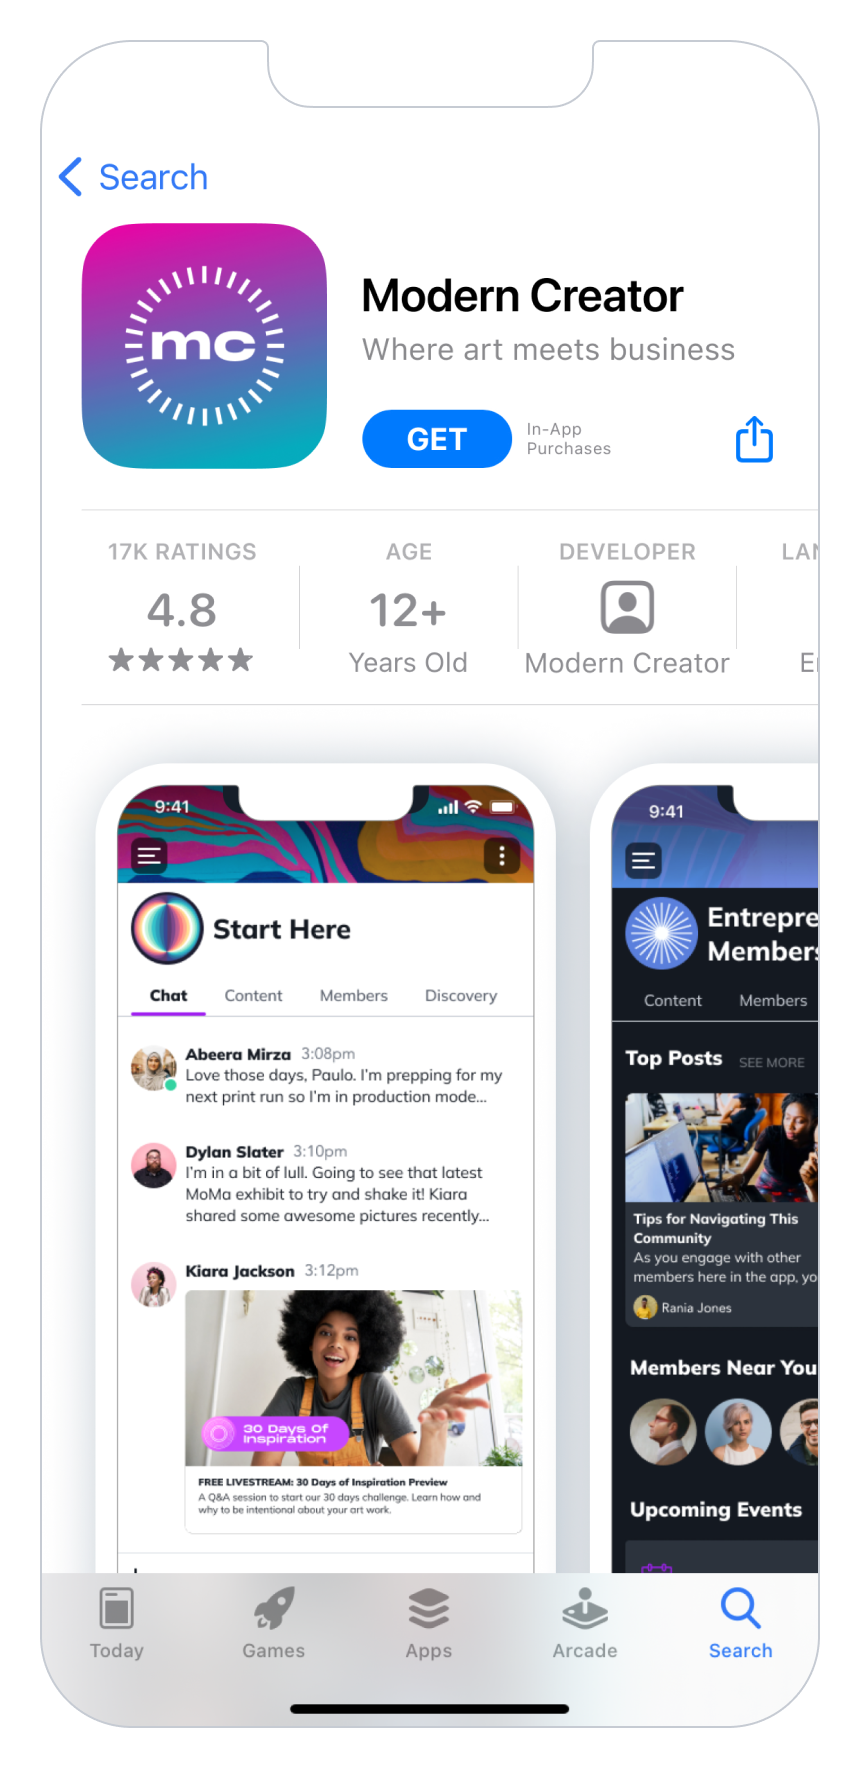 Mighty Pro Software - Put your brand in the app stores with Mighty Pro white-labeled iOS and Android apps. You get control over your Apple App Store and Google Play Store listings. Promote your app in ads, social content, on podcasts, and grow with organic app store discovery.